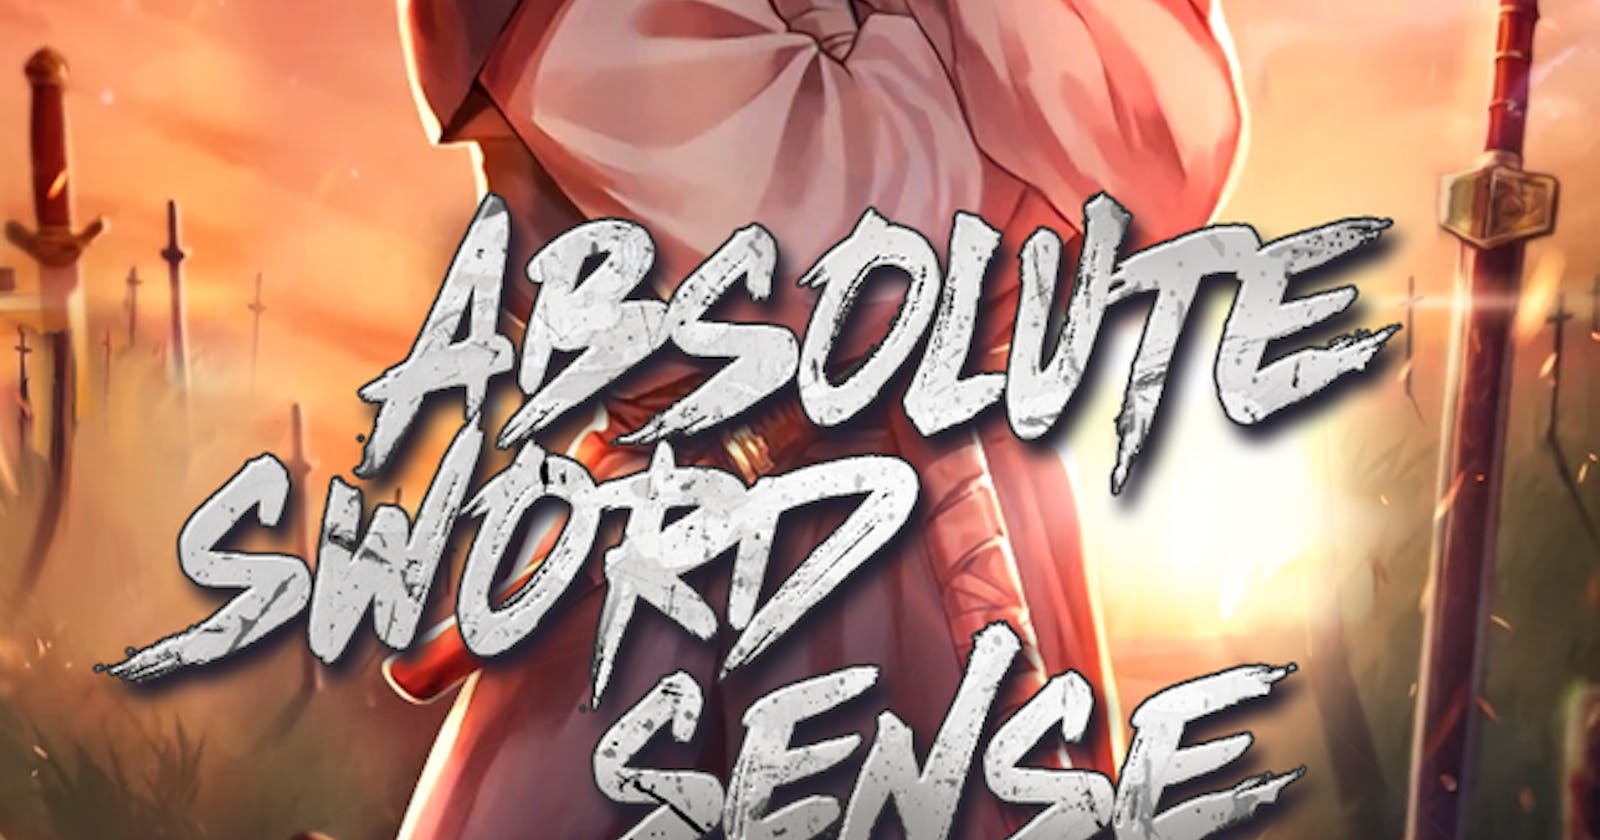 Absolute Sword Sense: Reclaiming a Broken Past with the Hum of Steel